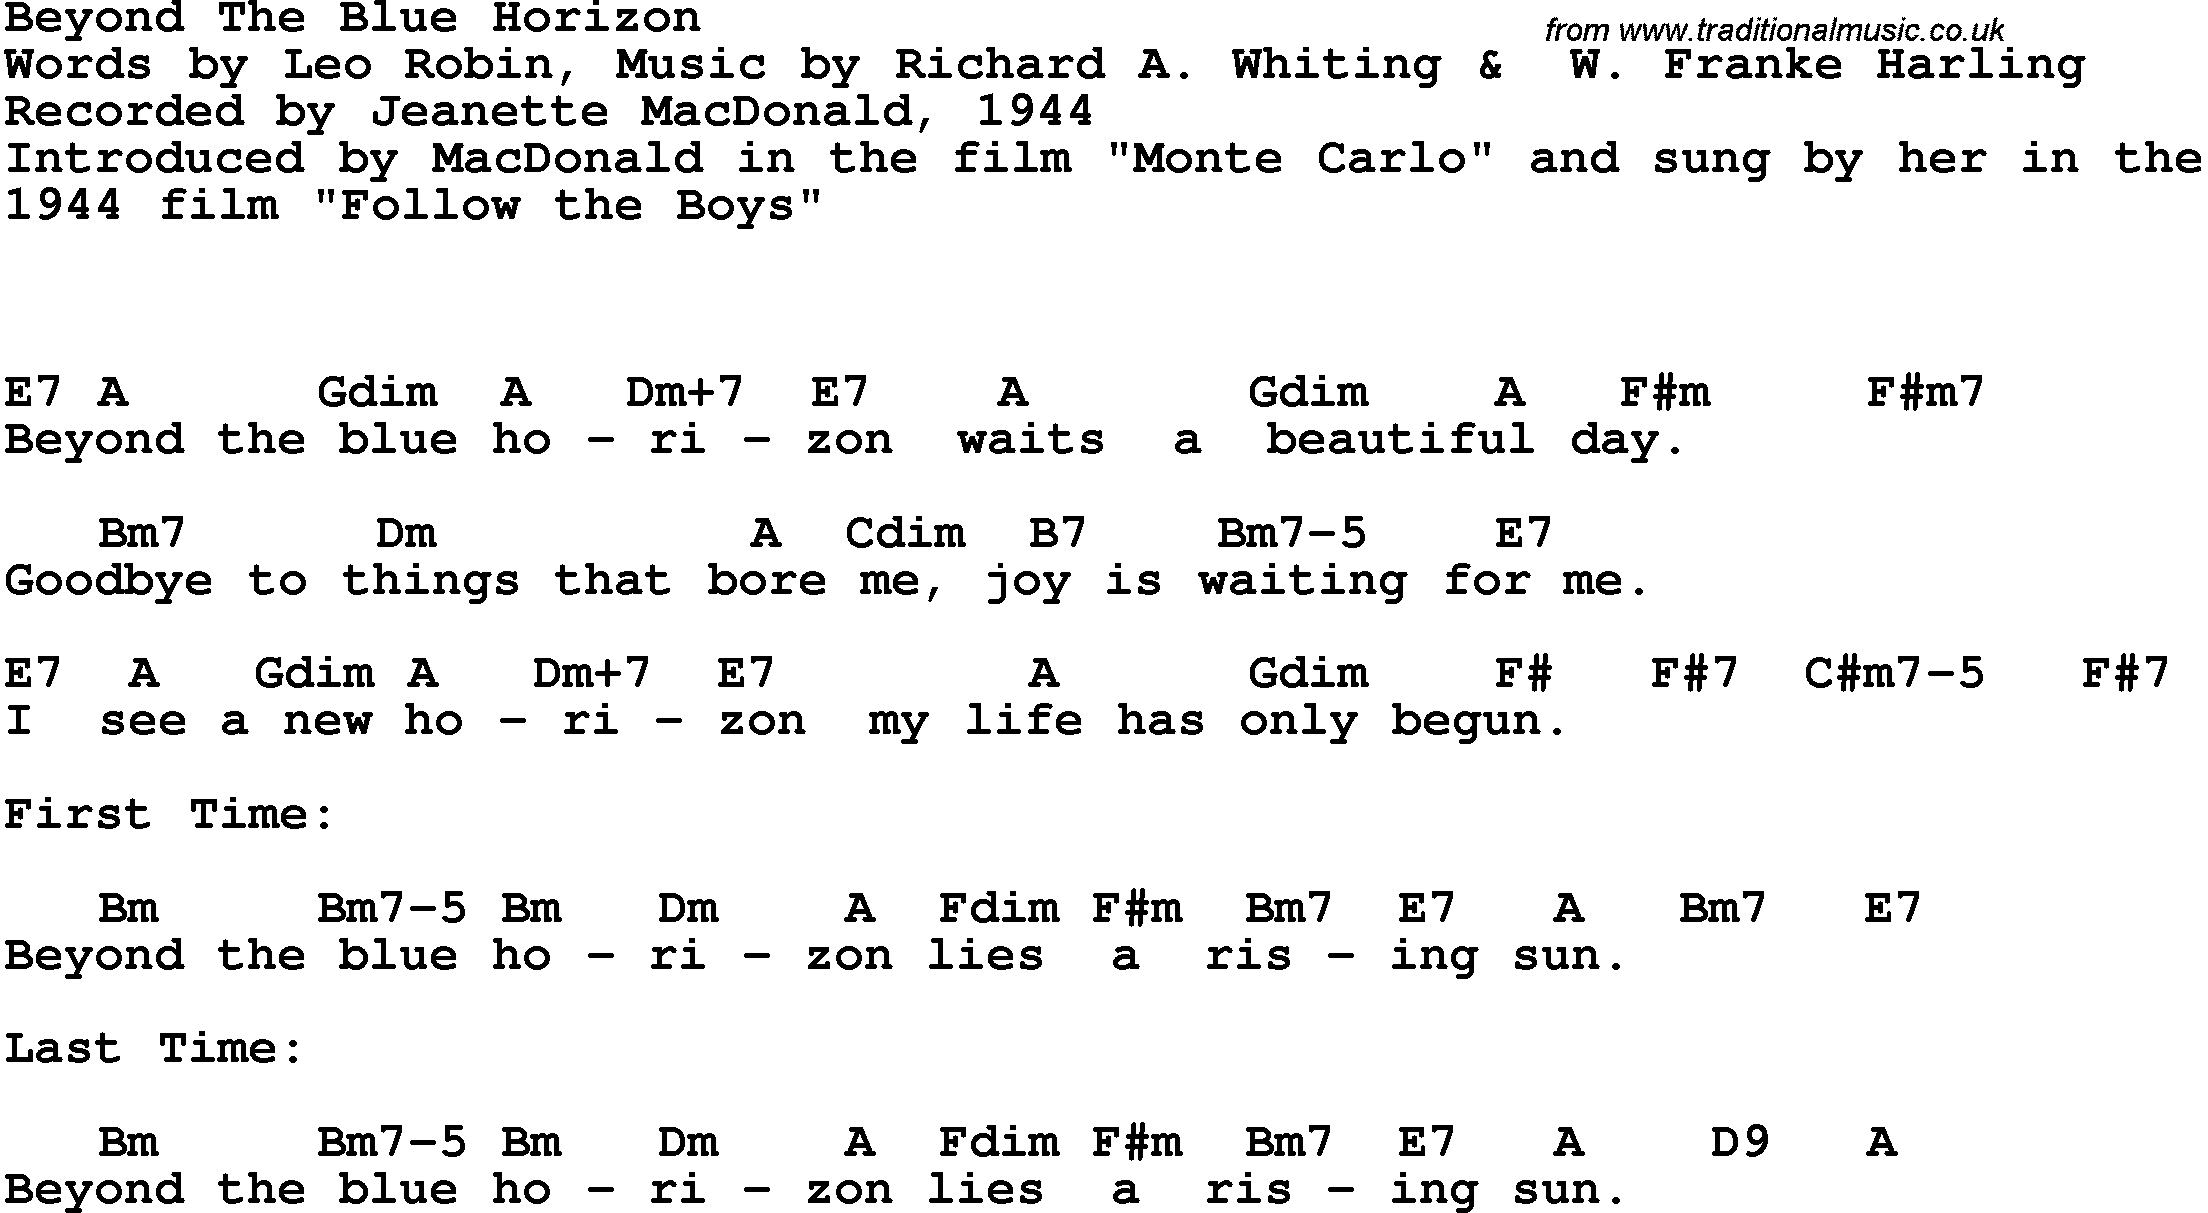 Song Lyrics with guitar chords for Beyond The Blue Horizon - Jeanette Macdonald, 1944